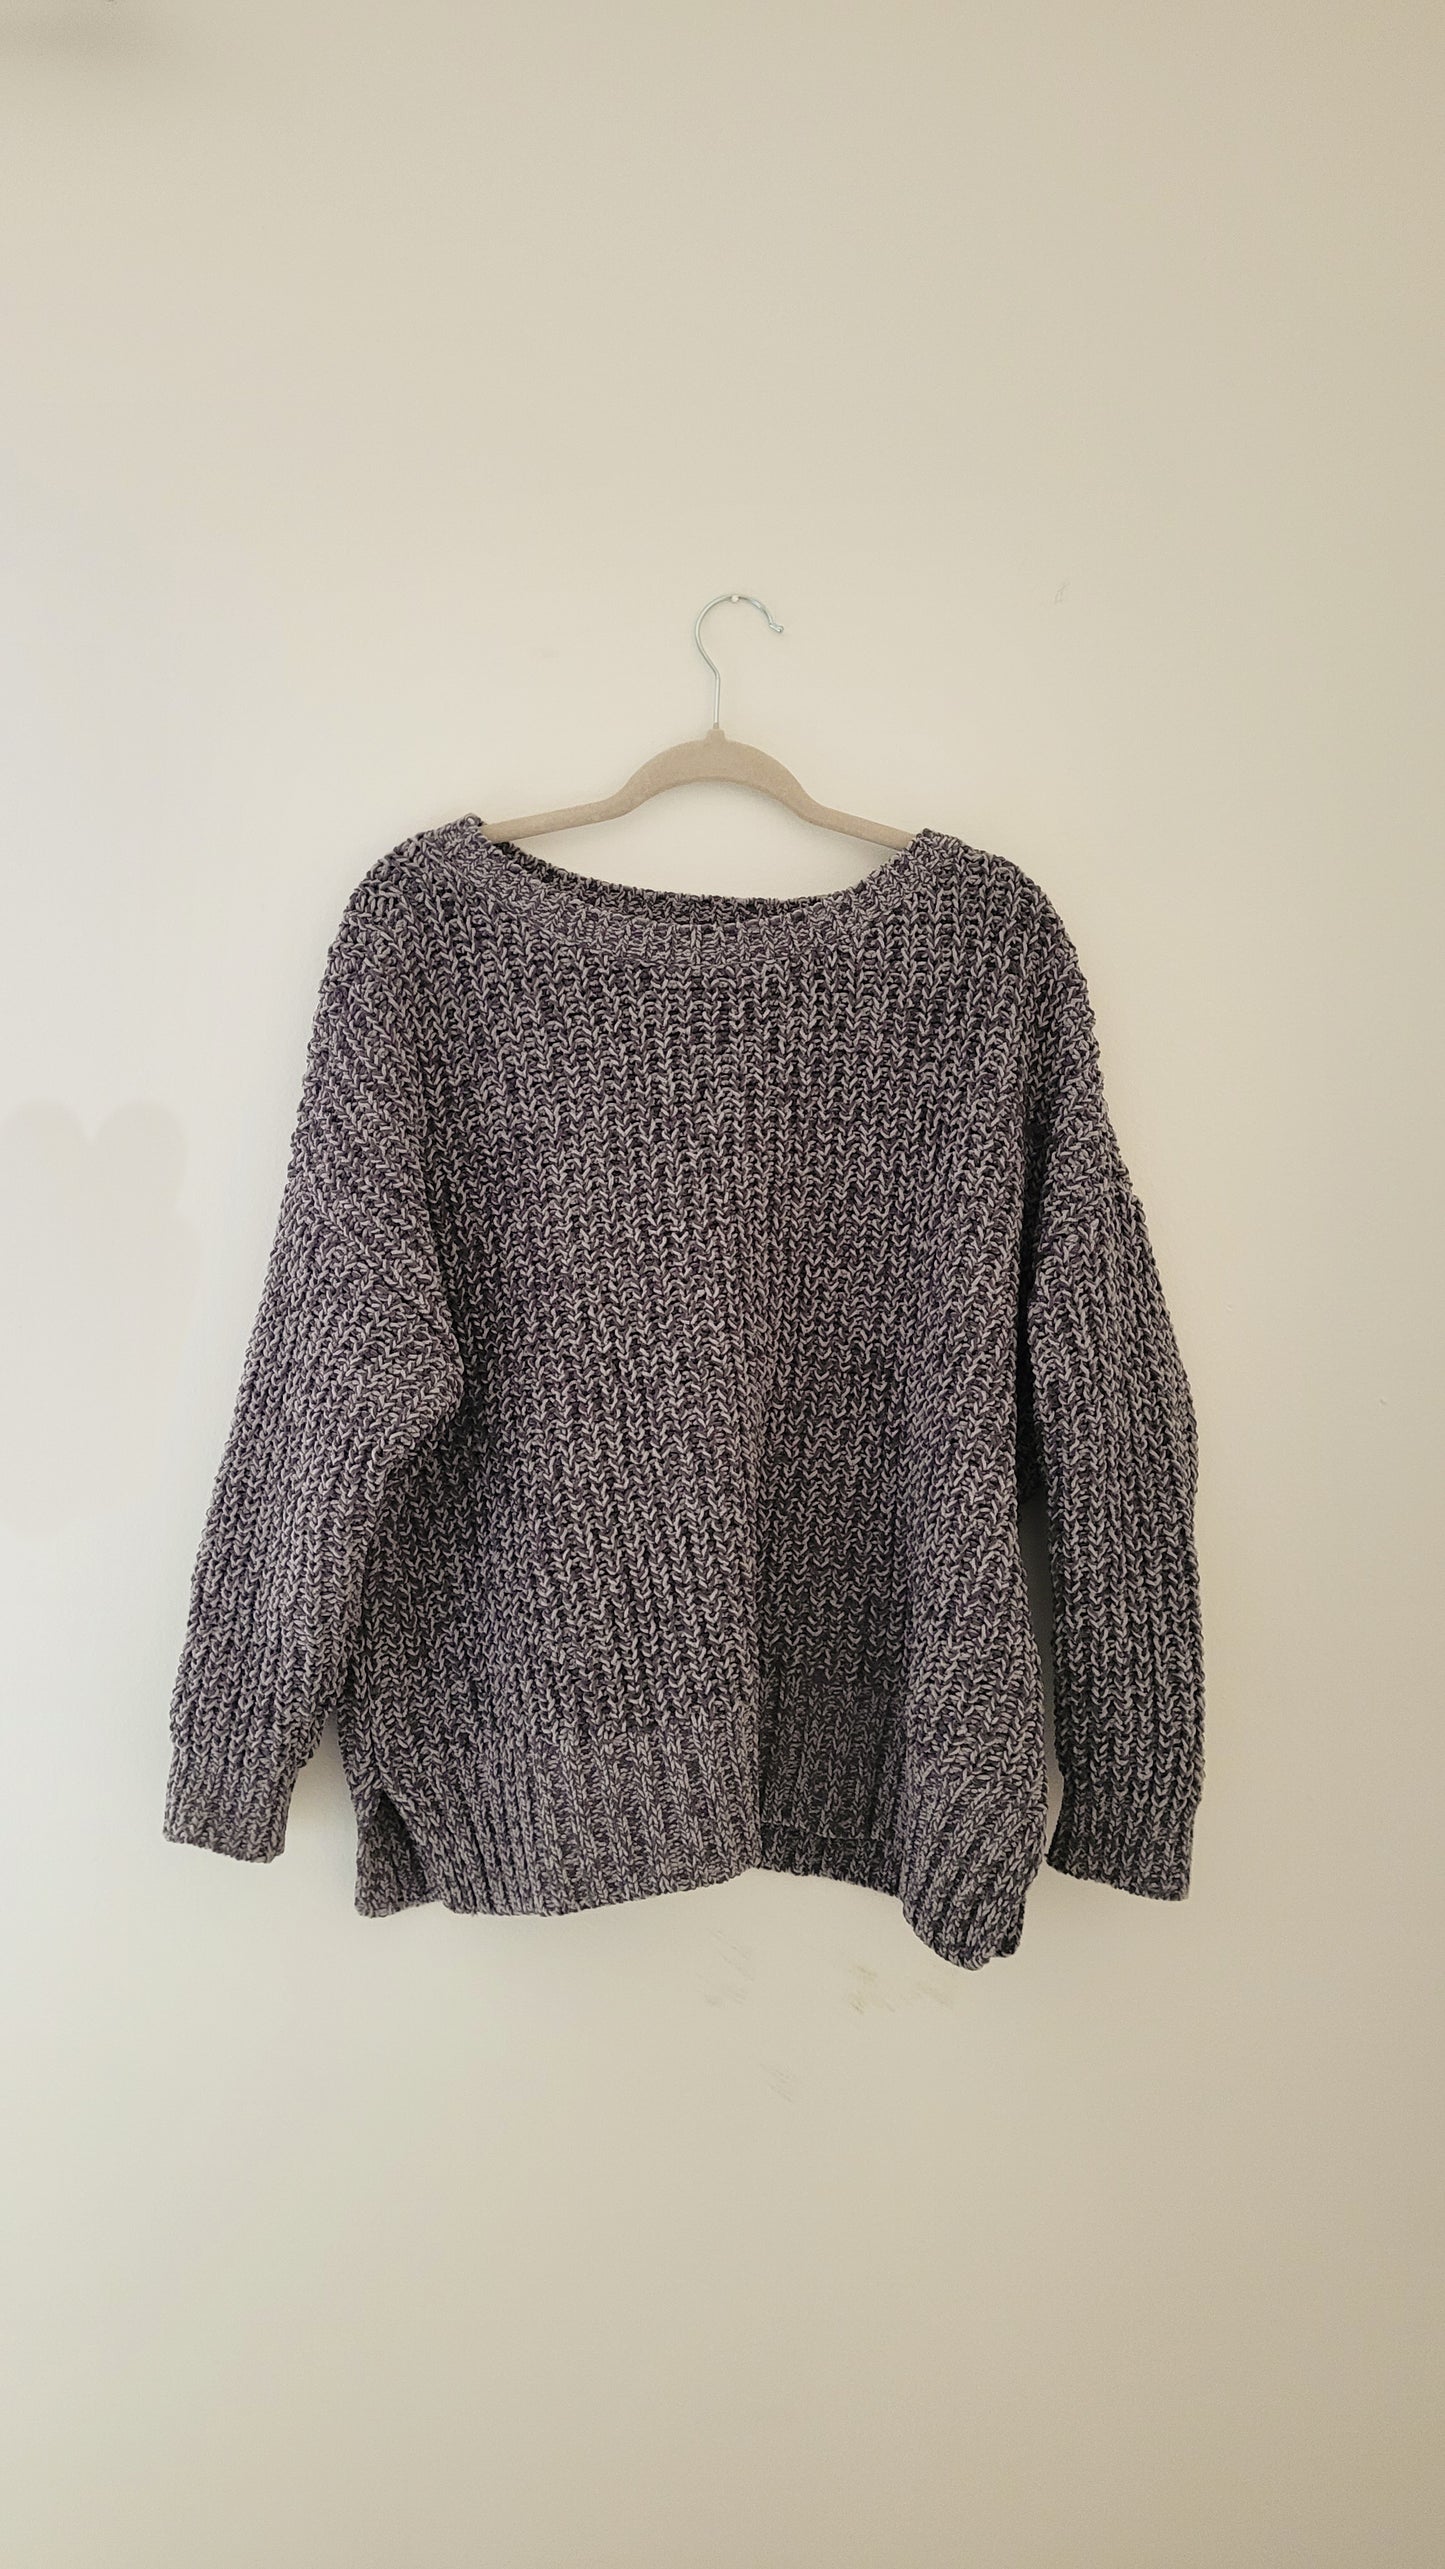 Chunky Knit Sweater | American Eagle | Oct Drop